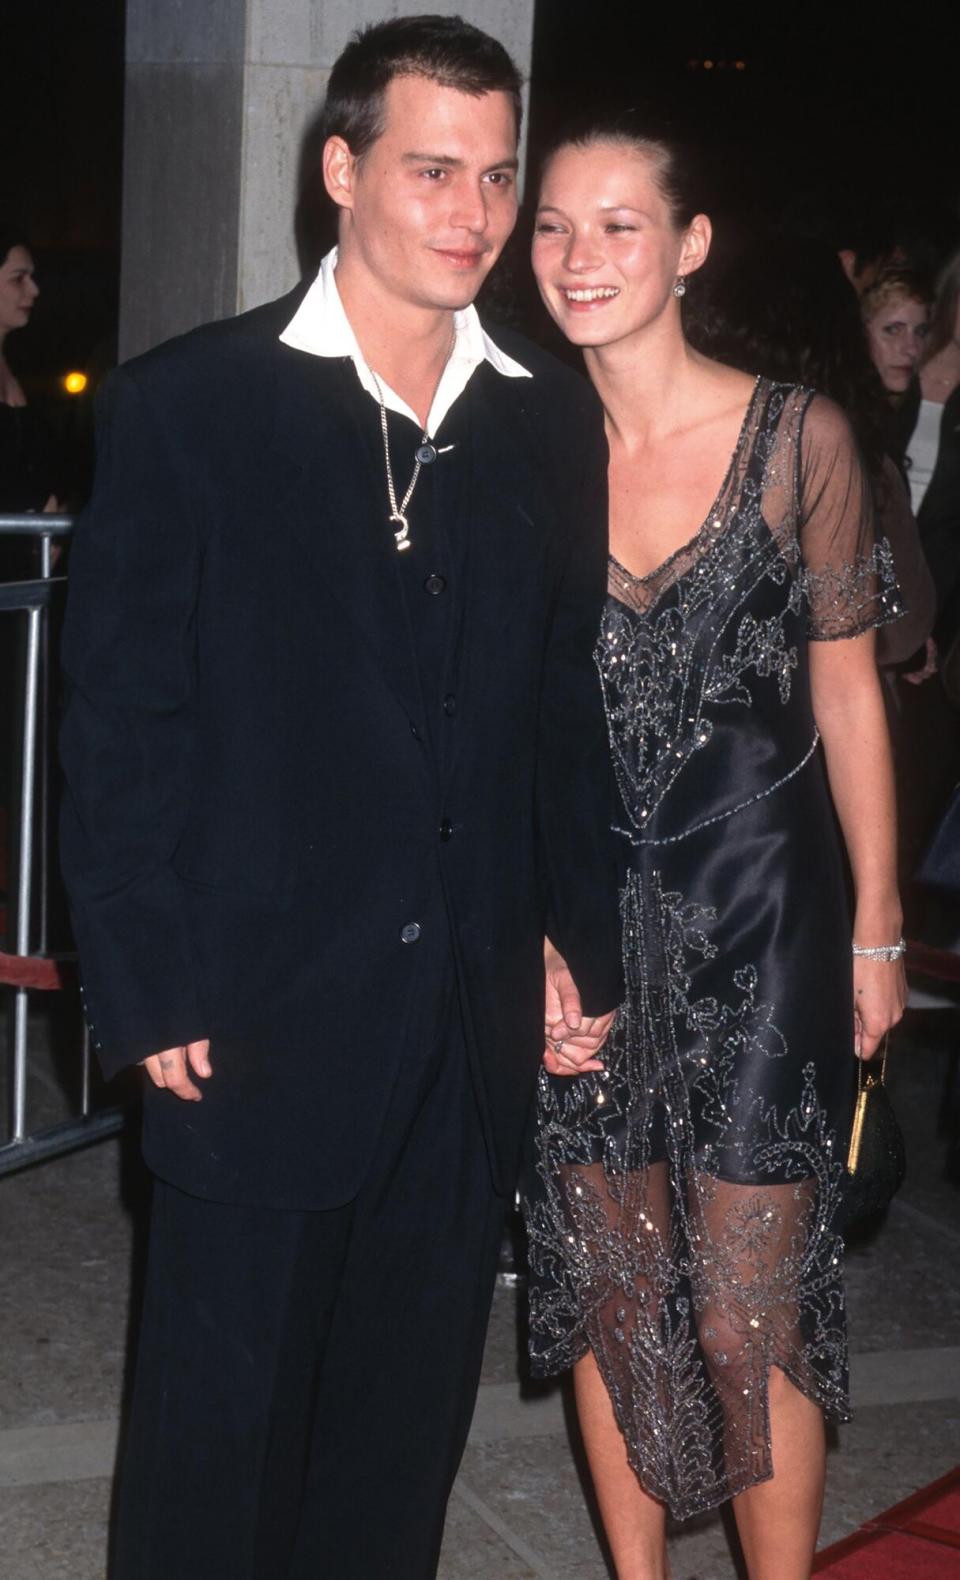 Johnny Depp and fashion model Kate Moss, attend the premiere of 'Donnie Brasco' at the Cineplex Odeon Cinema, Century City, California, March 24, 1997